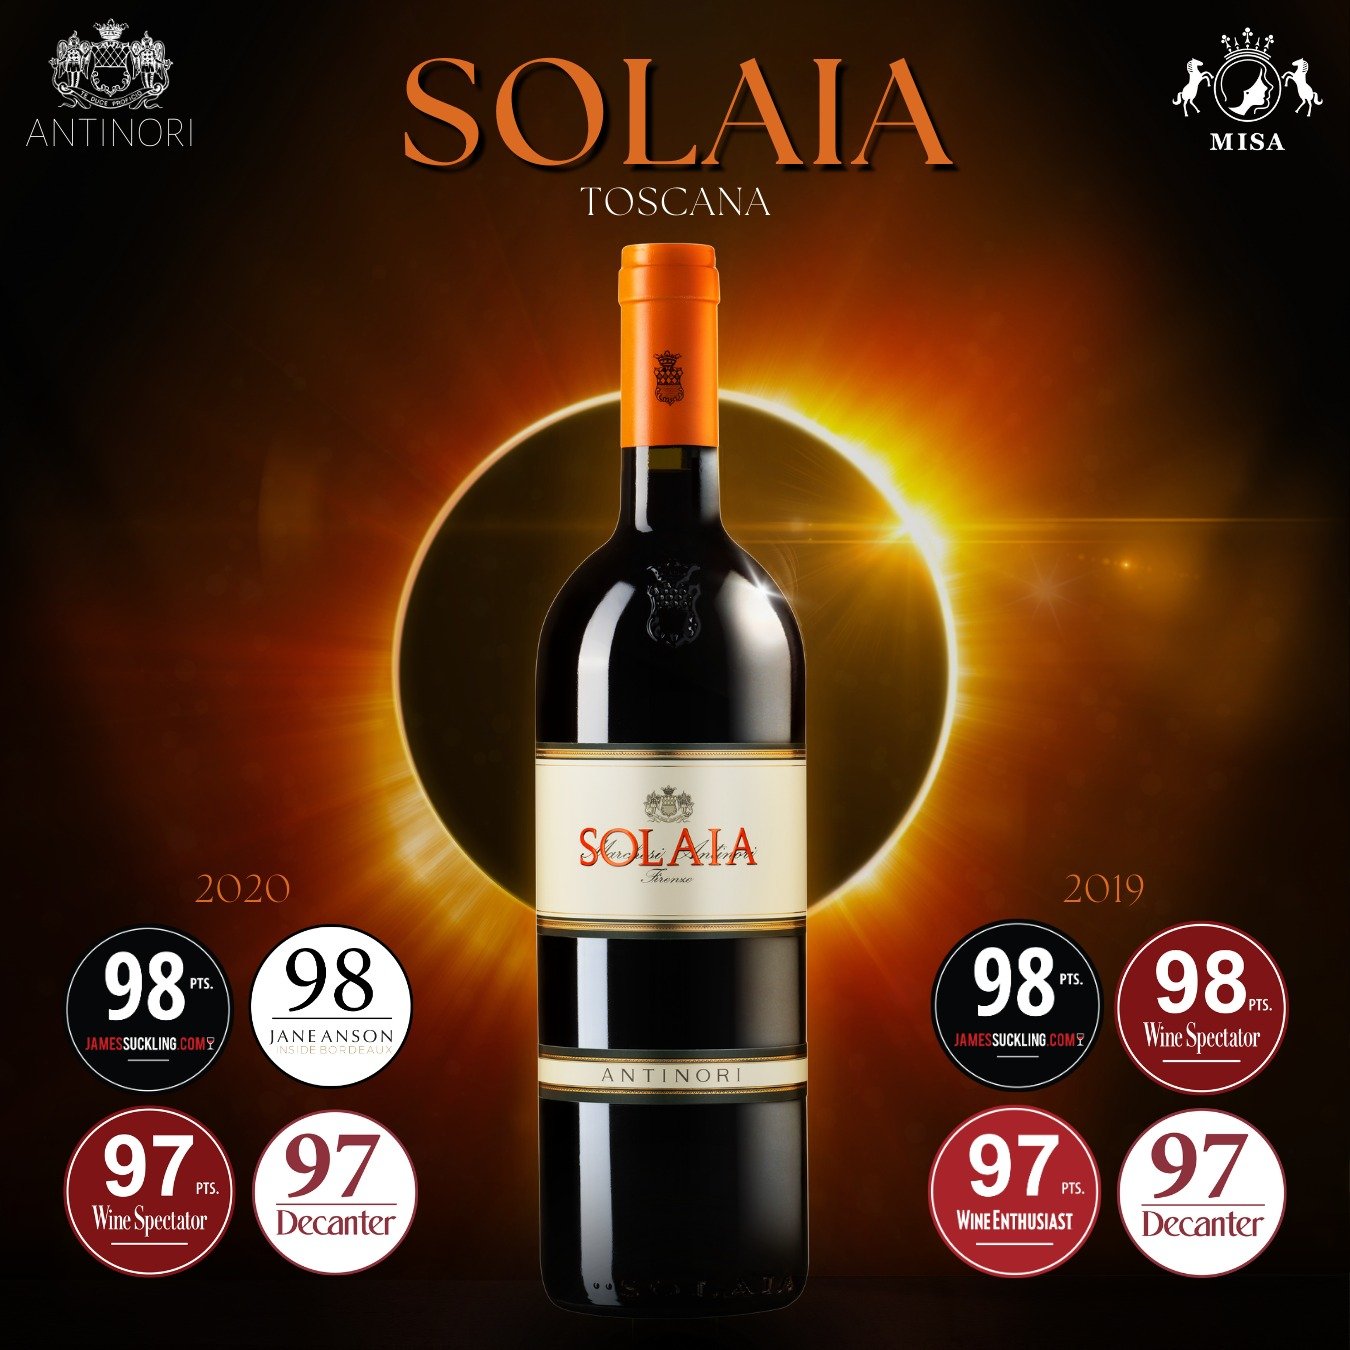 Solaia is a wine that won't be eclipsed!

The sunniest part of Antinori's Tignanello Estate hillside is home to the Solaia vineyard. The very best grapes from the very best vineyard are used in its creation. All the rest is passion, the utmost care a